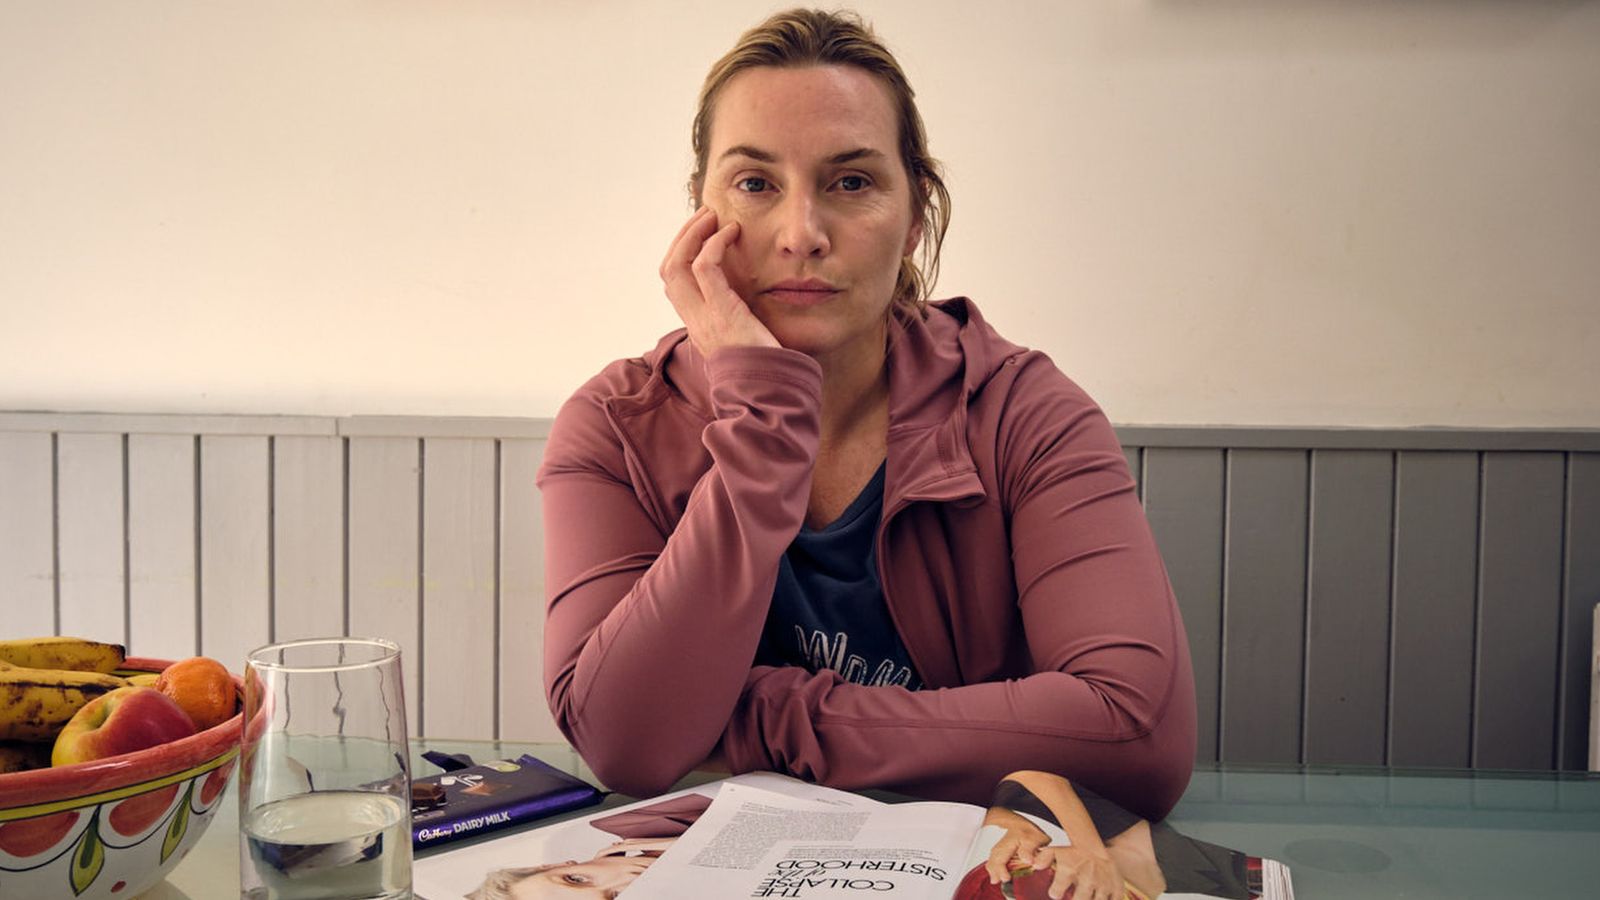 Kate Winslet on I Am Ruth and how film explores teenage phone addiction: 'Social media has always worried me'